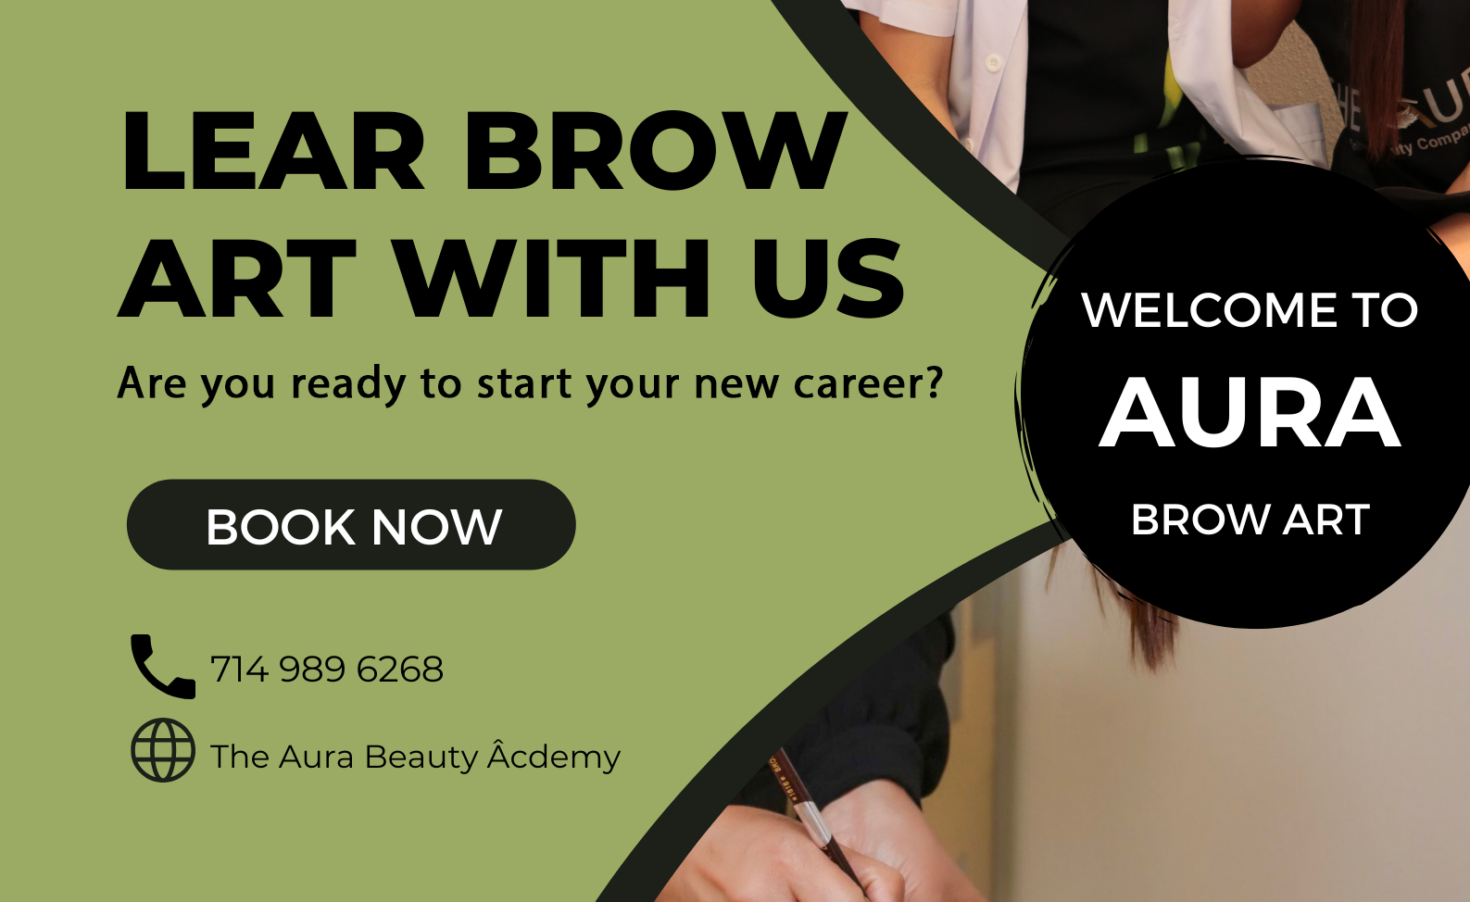 Learn how to draw brows from the scratch at The Aura Beauty